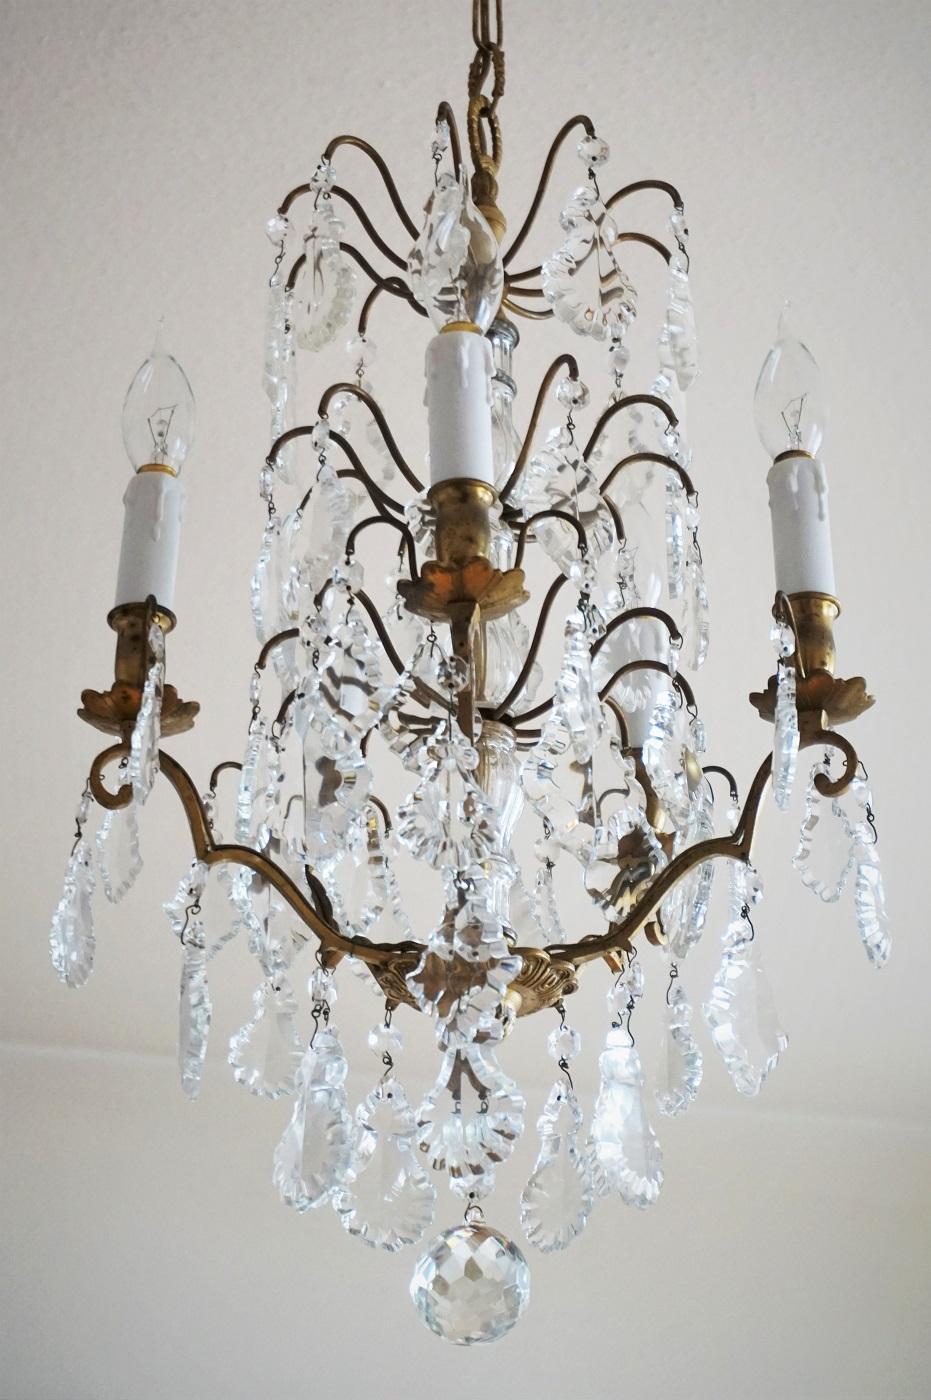 A lovely antique Baccarat crystal electrified chandelier, gilt brass beautifully decorated with several tiers of large pendaloques in different shapes and sizes, finishing at the bottom with a large clear cut crystal ball, including chain and